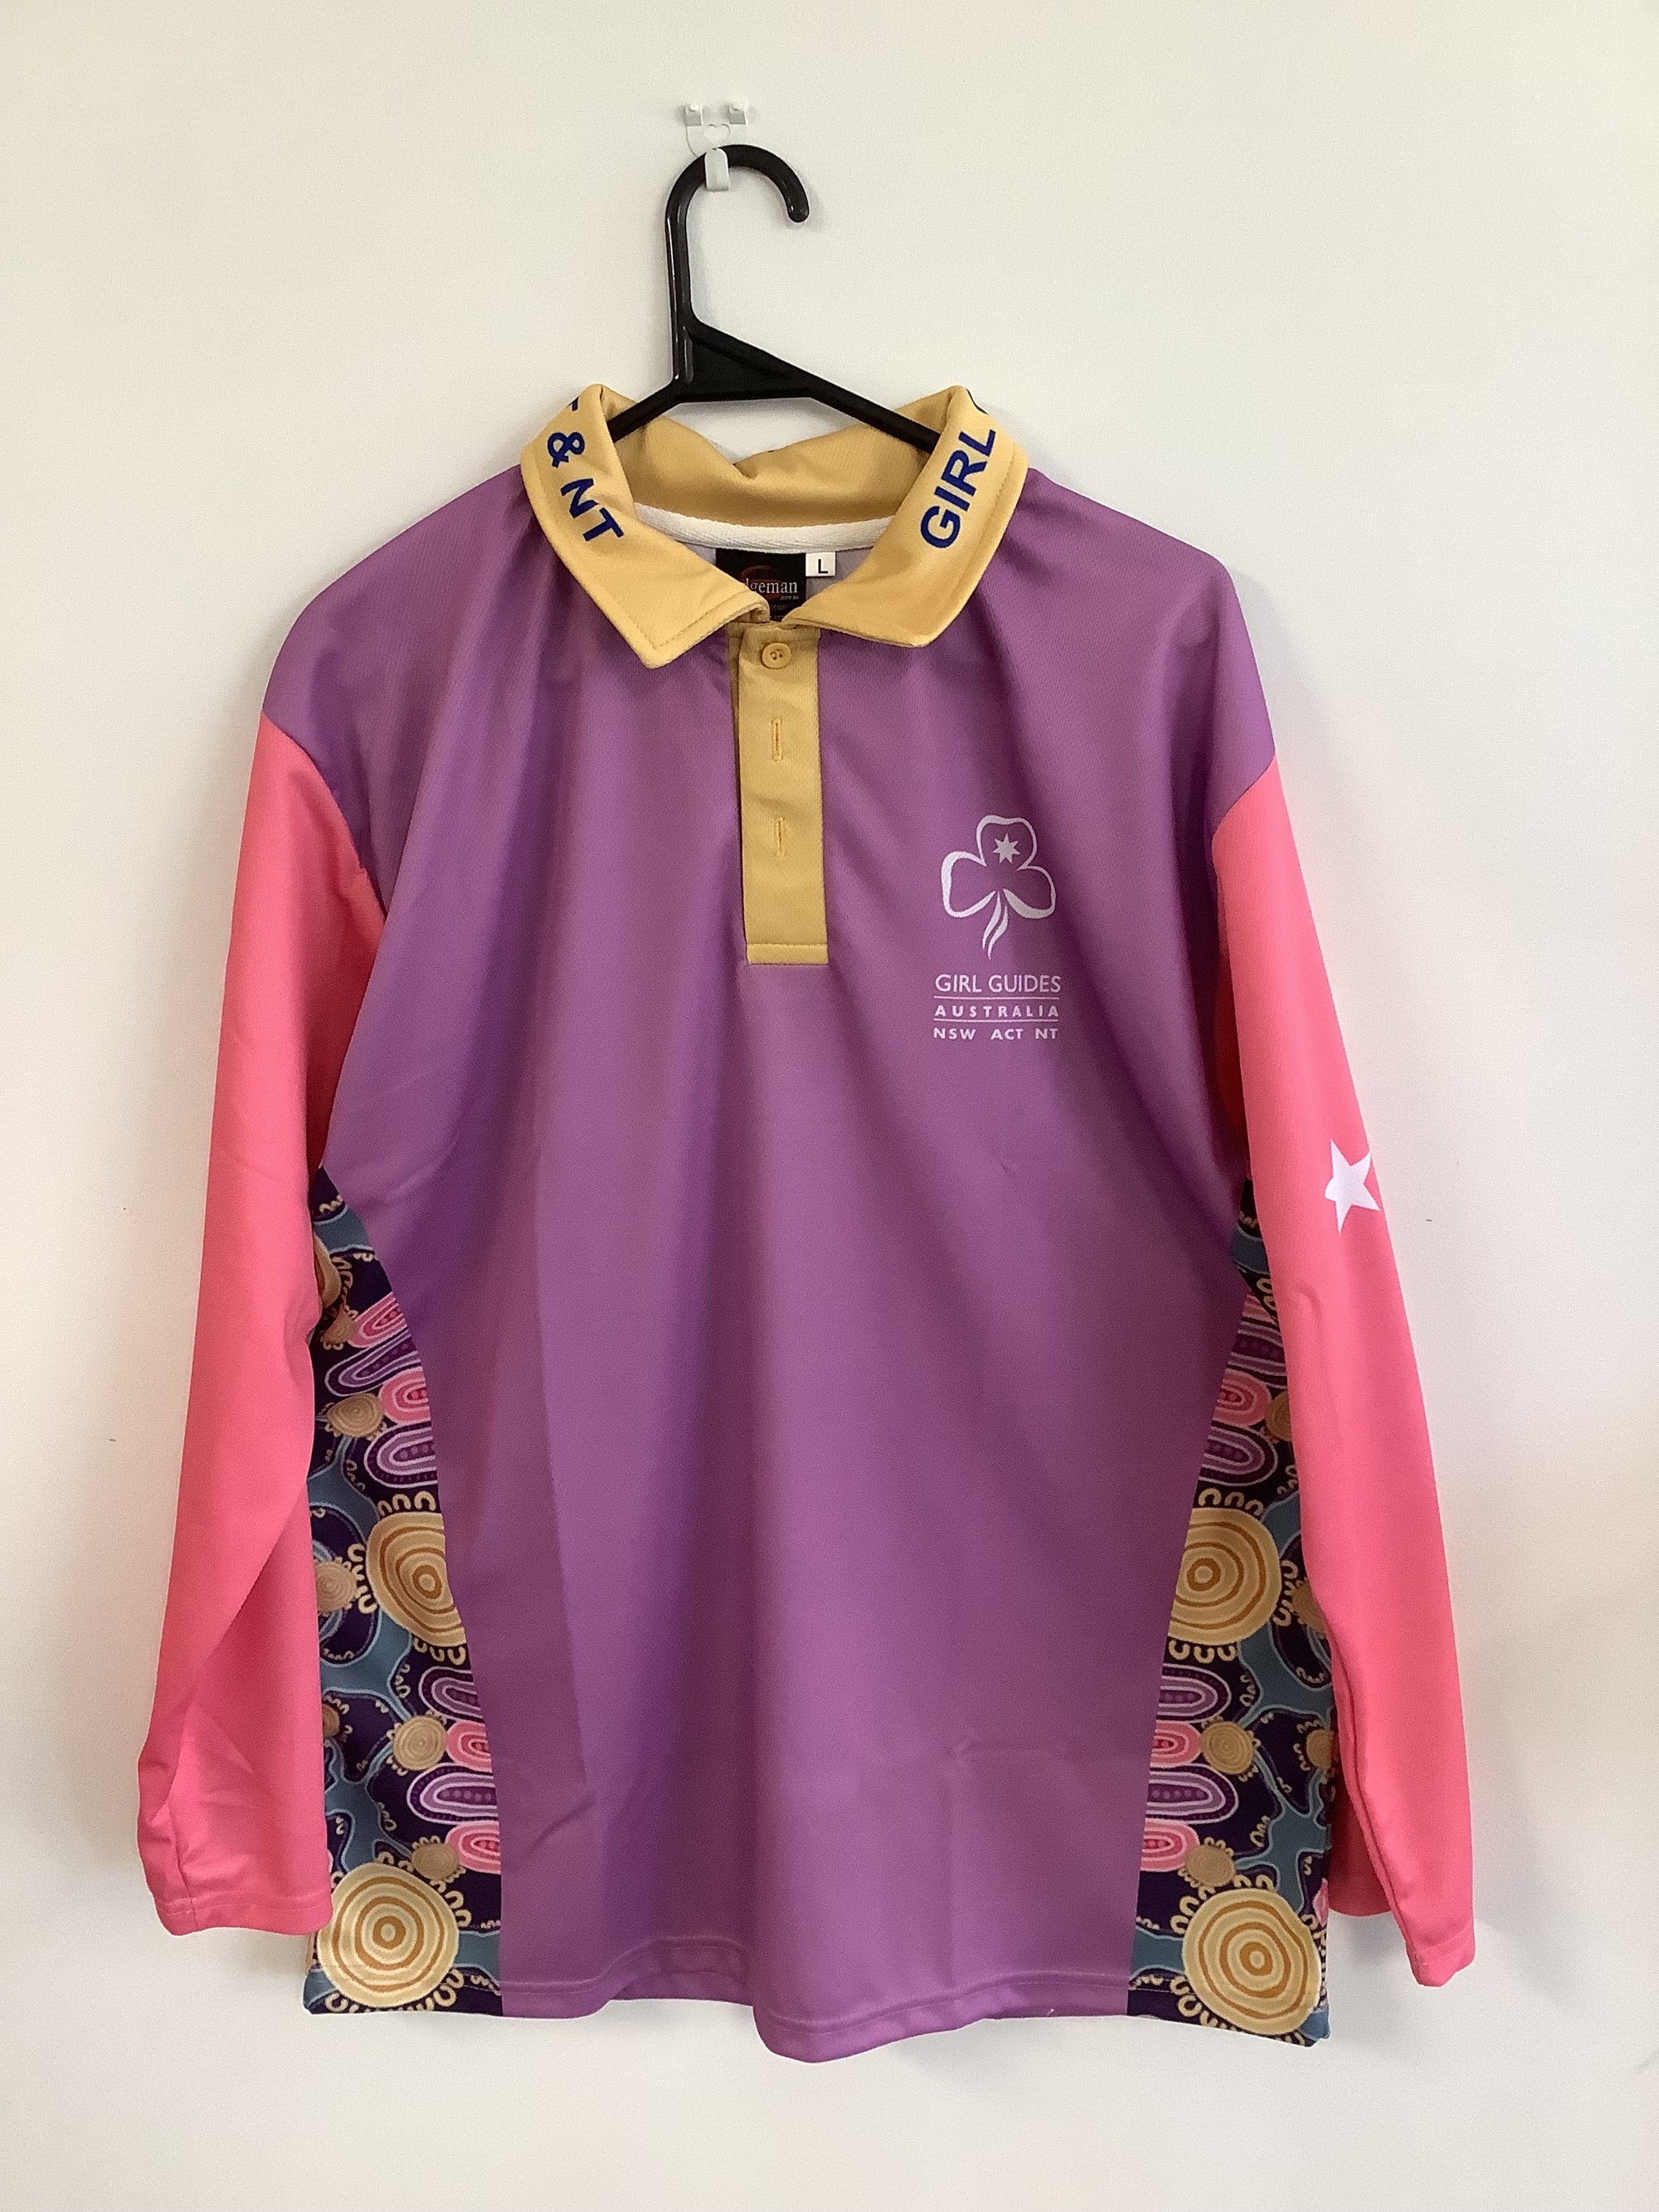 a long sleeved polo shirt with pink sleeves, purple body with aboriginal art on the sides and a gold collar